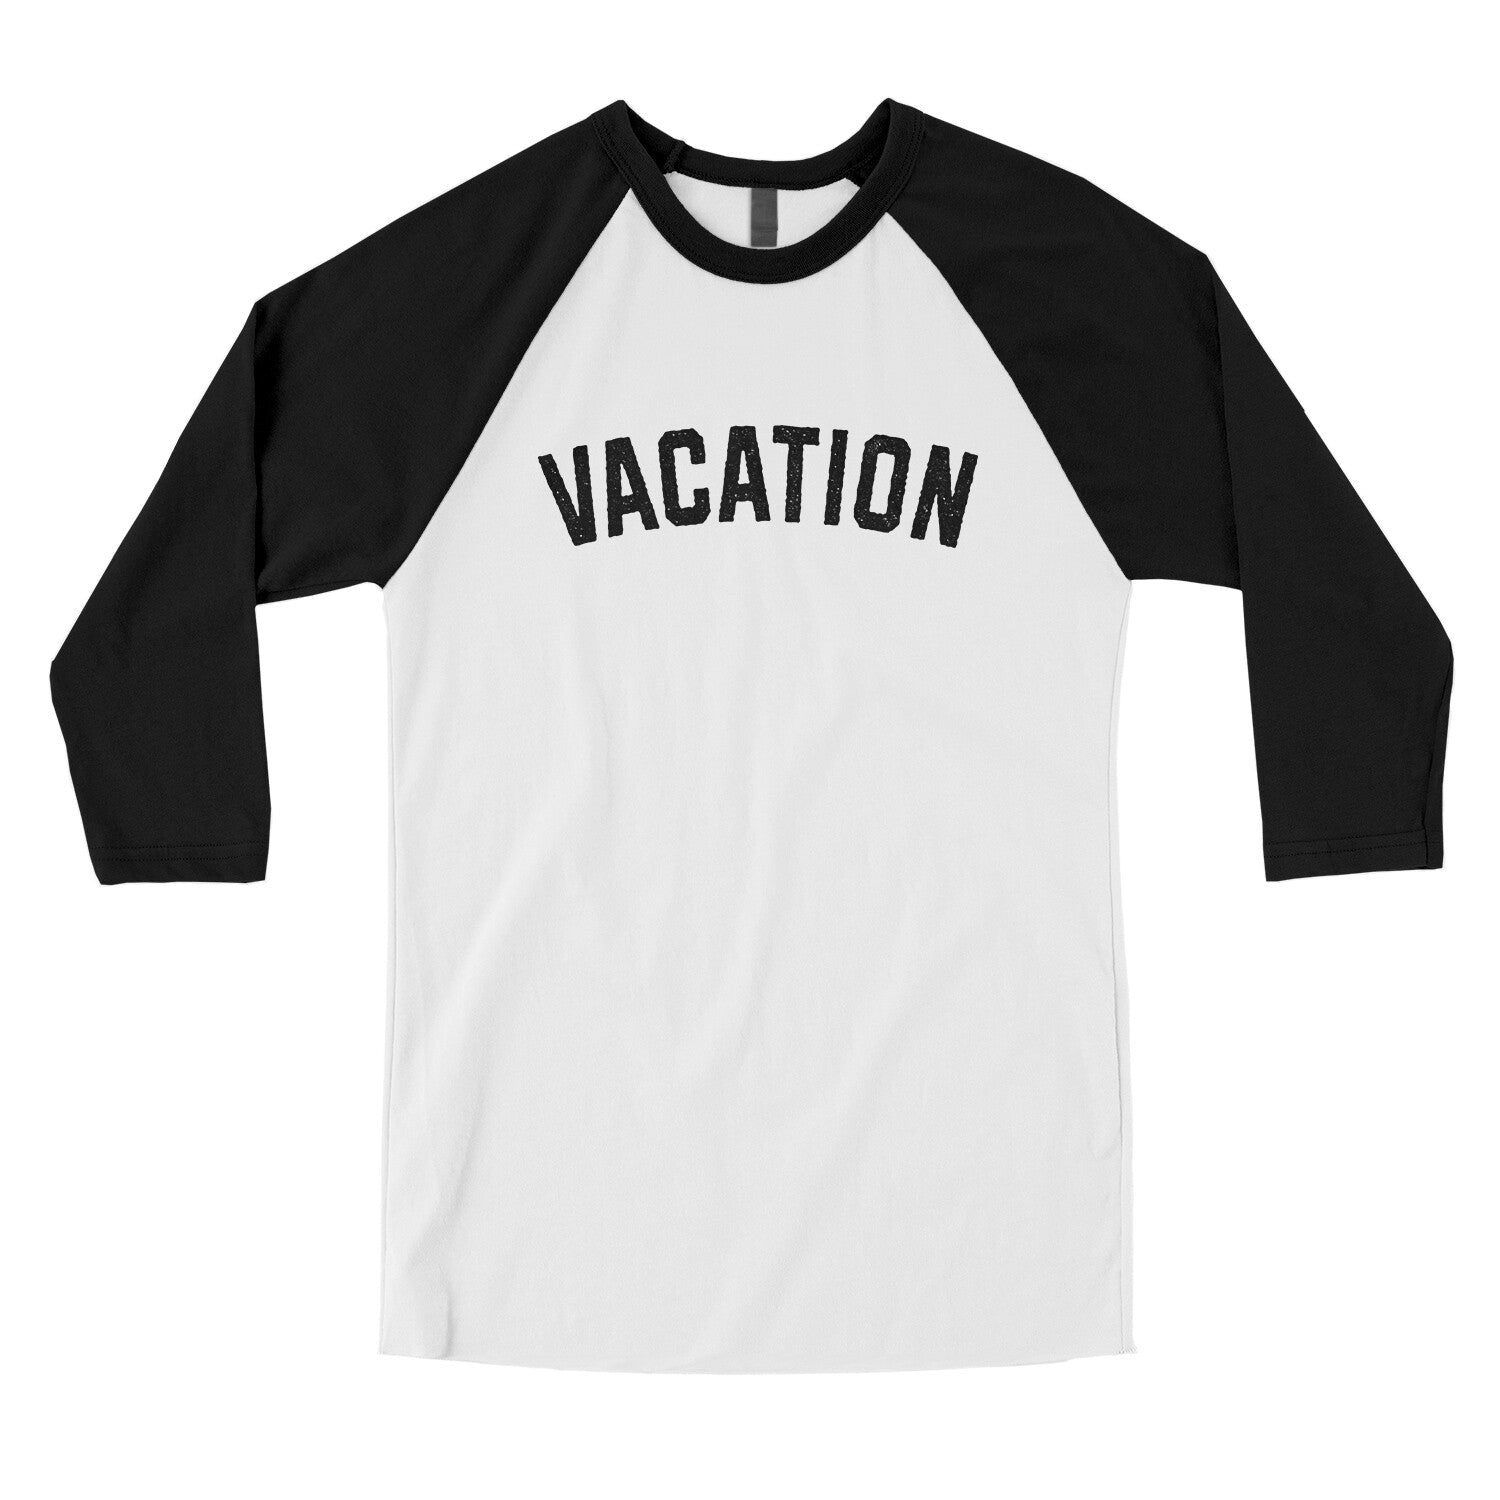 Vacation in White with Black Color